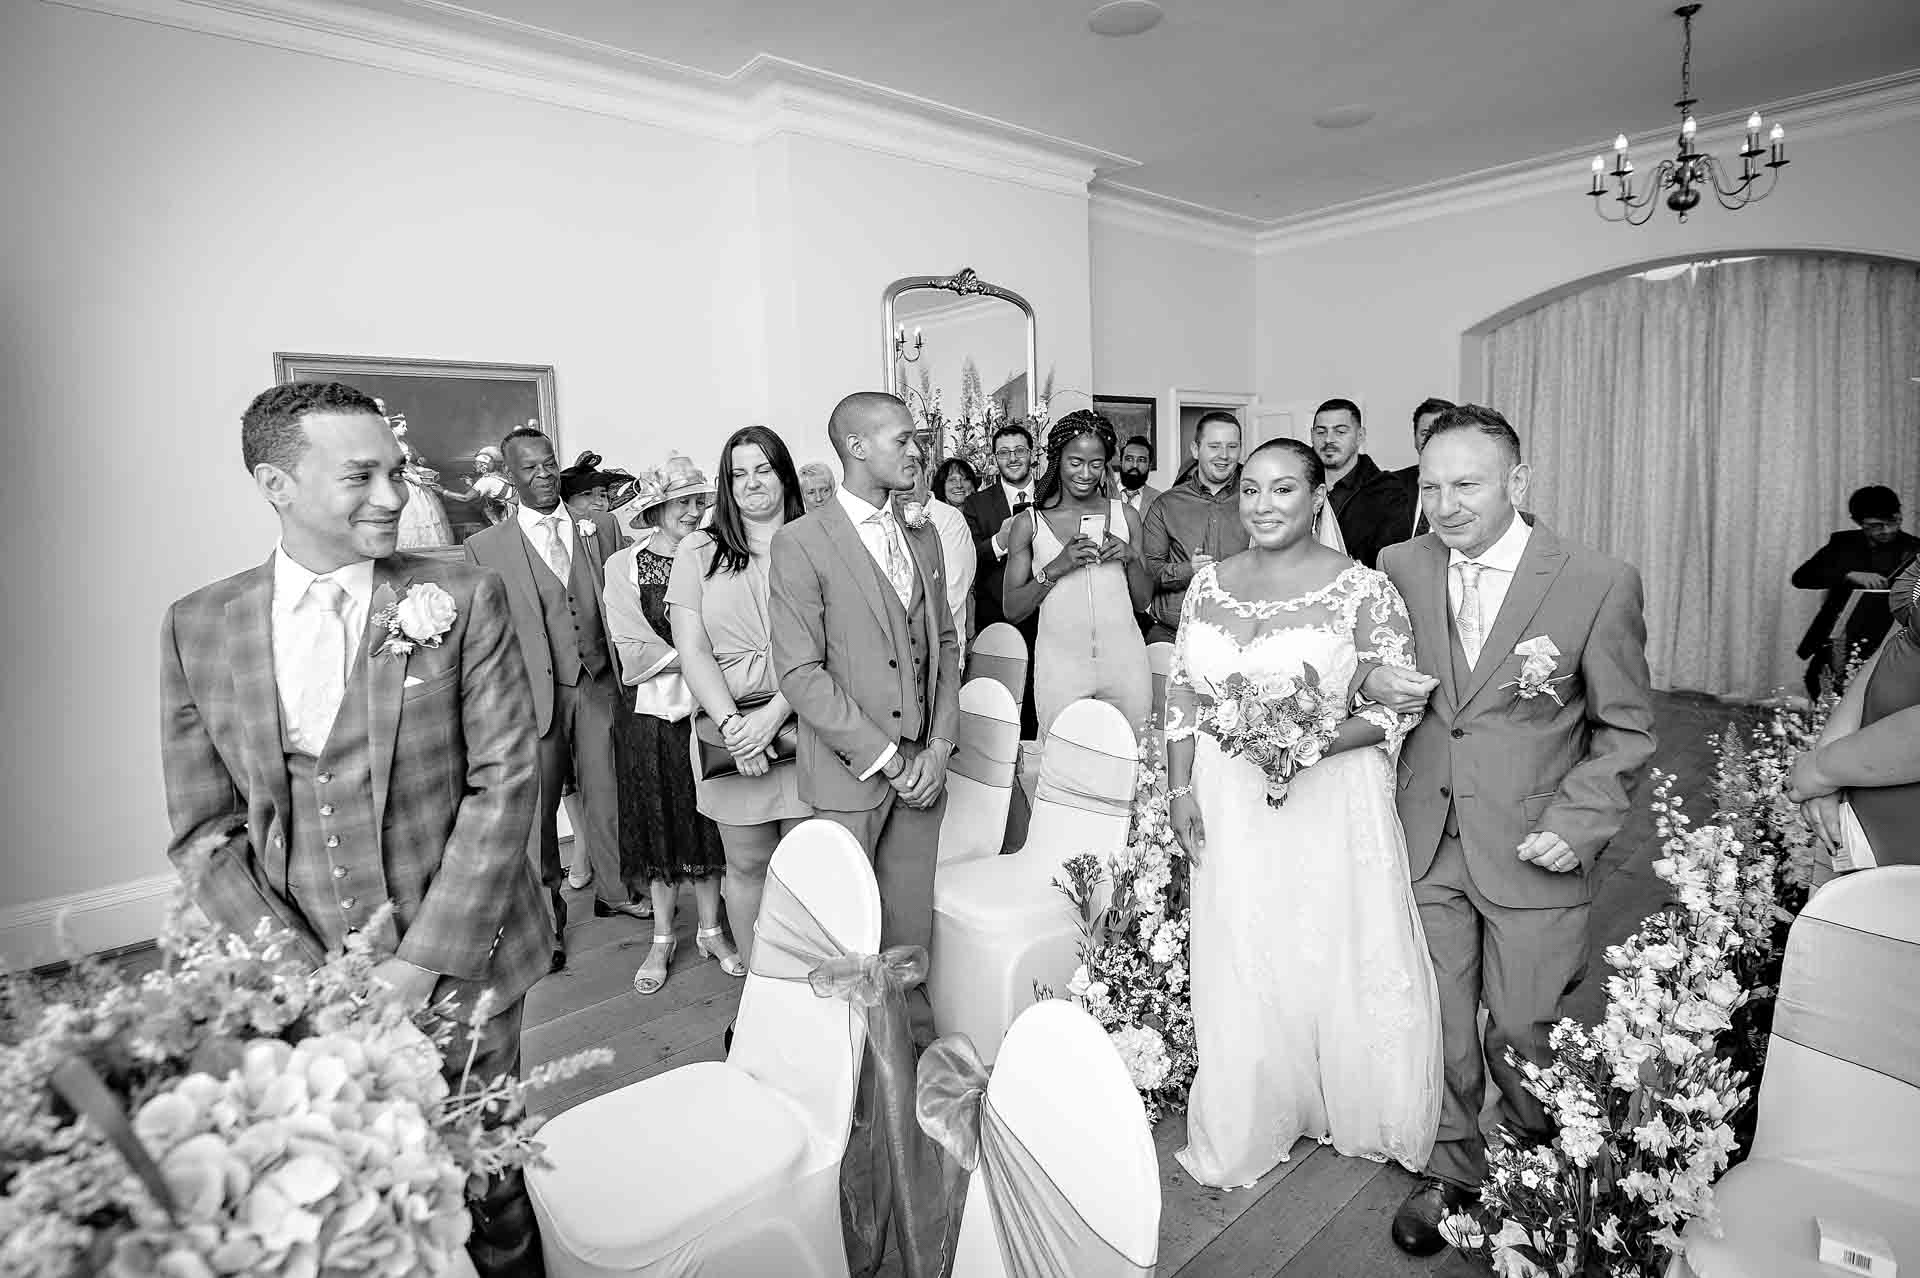 Groom sees bride for the first time at Pembroke Lodge wedding